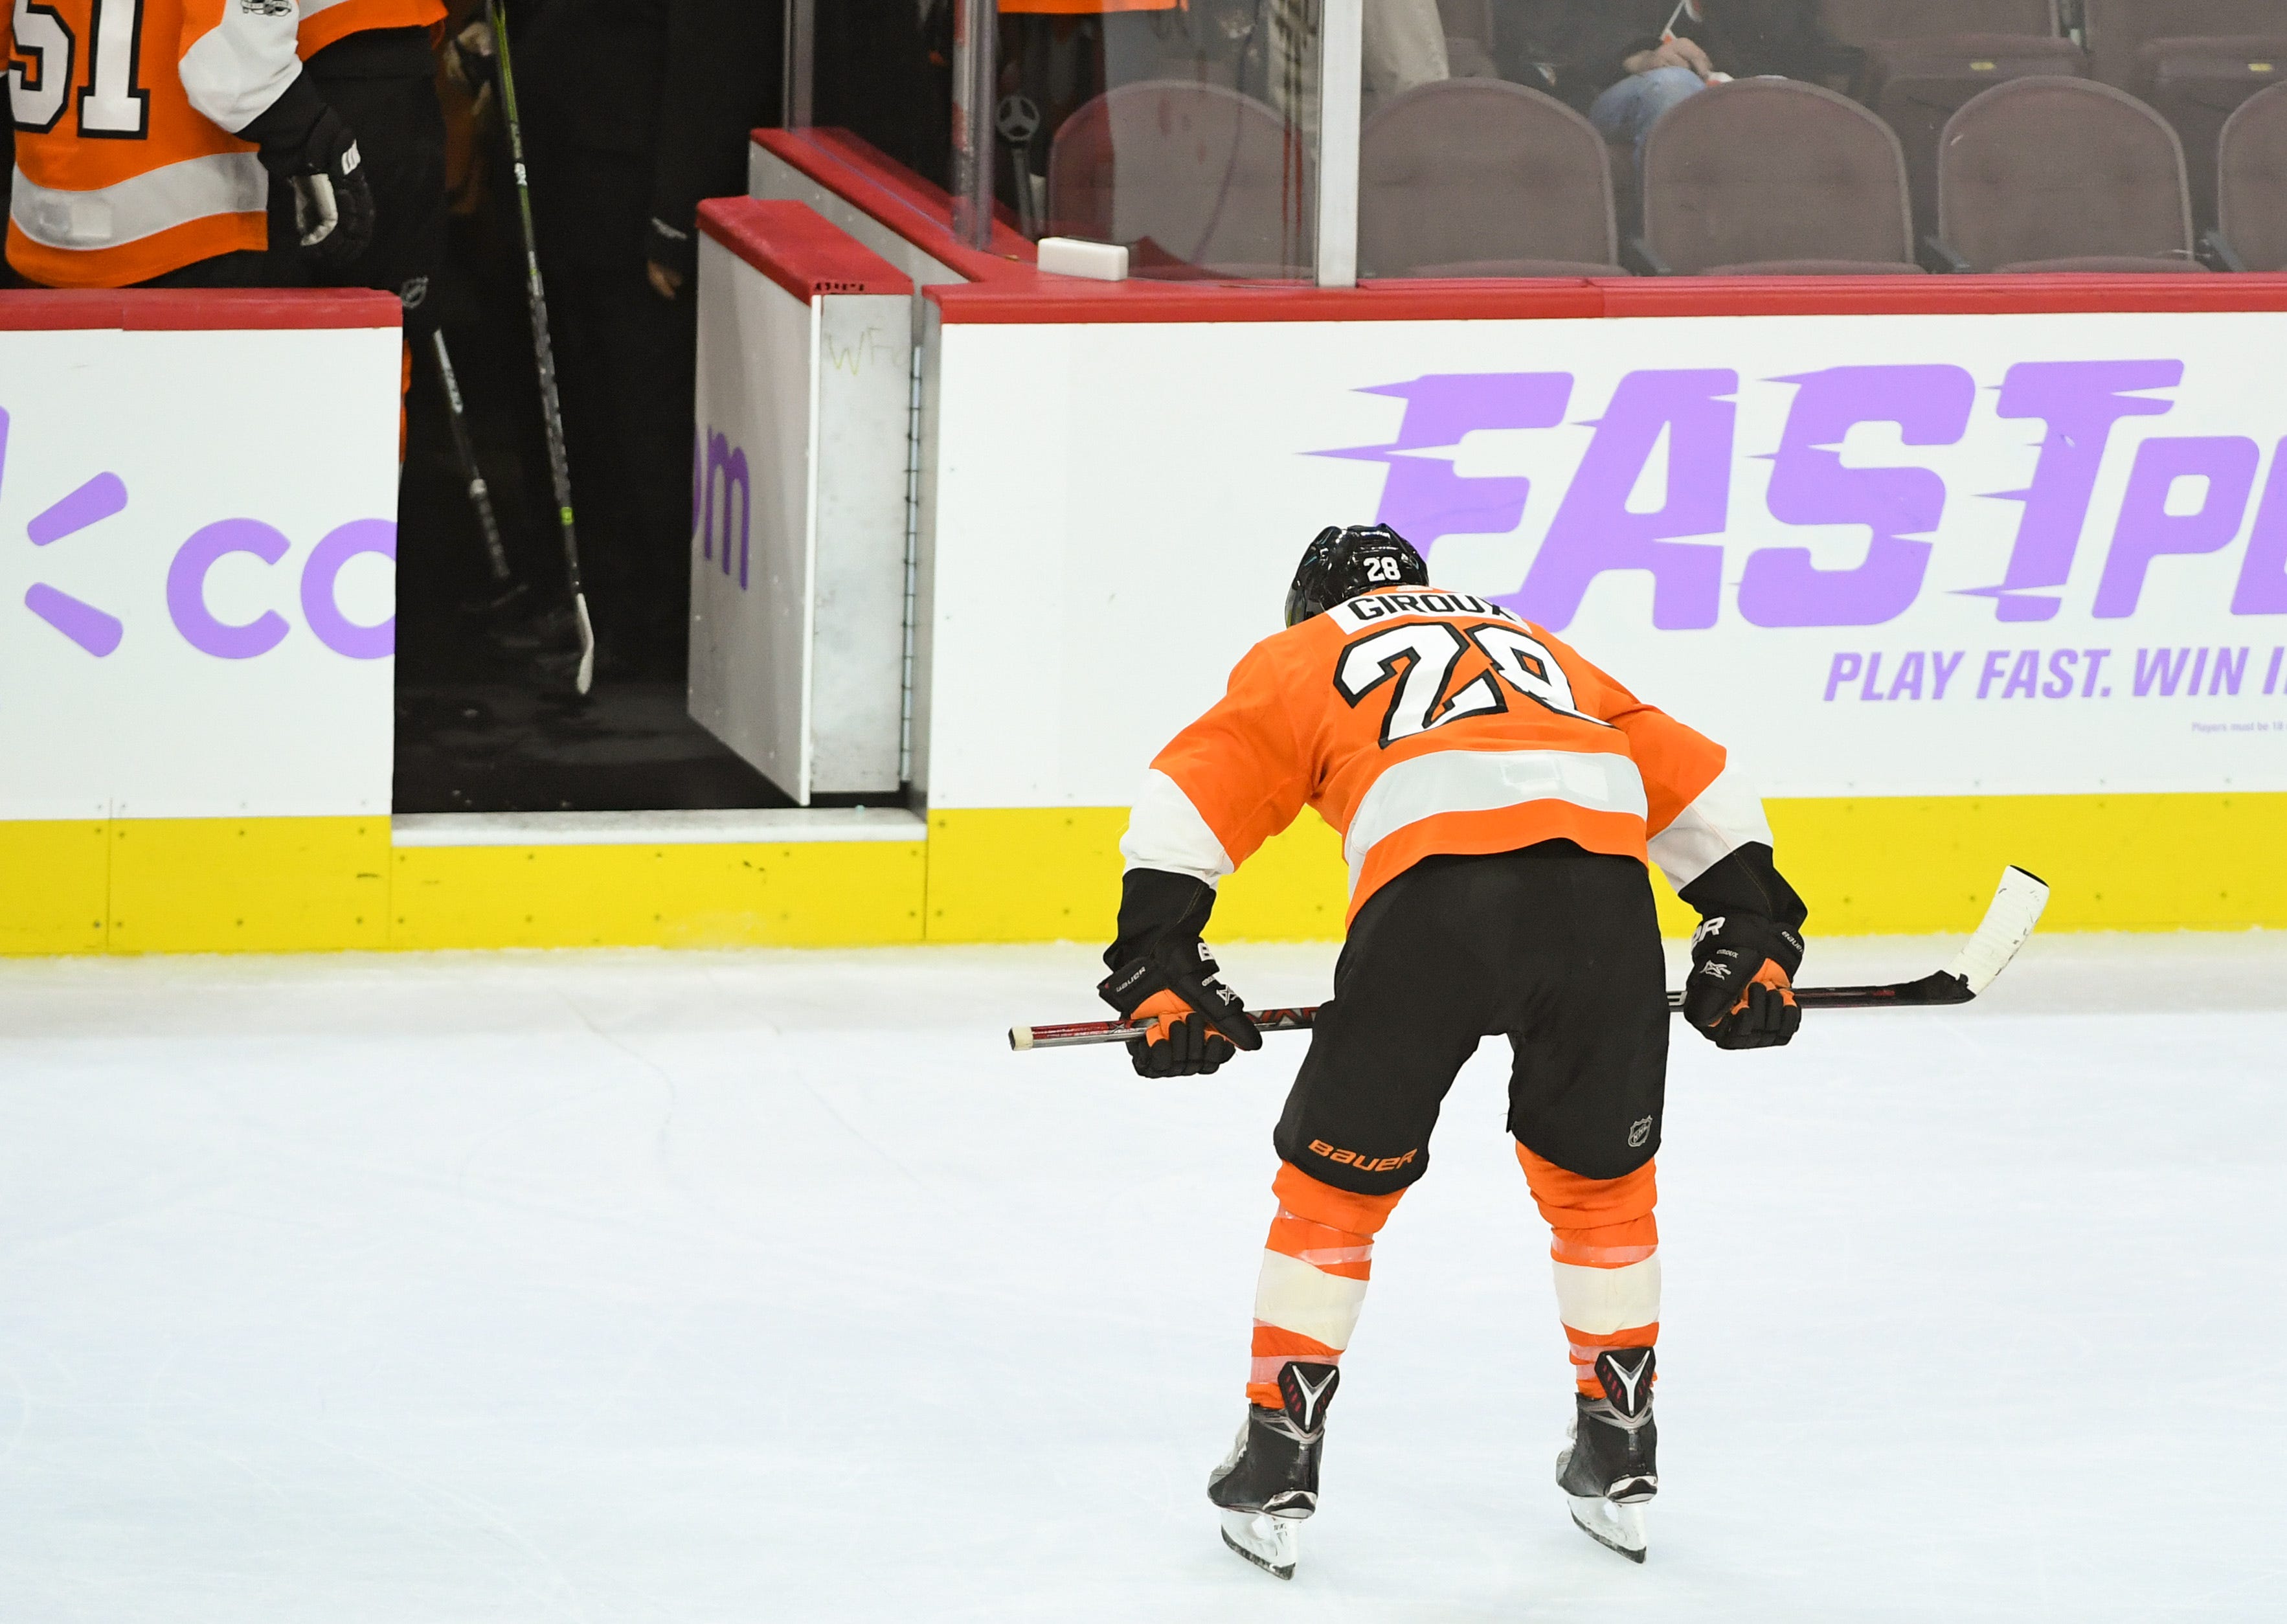 Ron Hextall says Flyers are still a playoff team, but how?